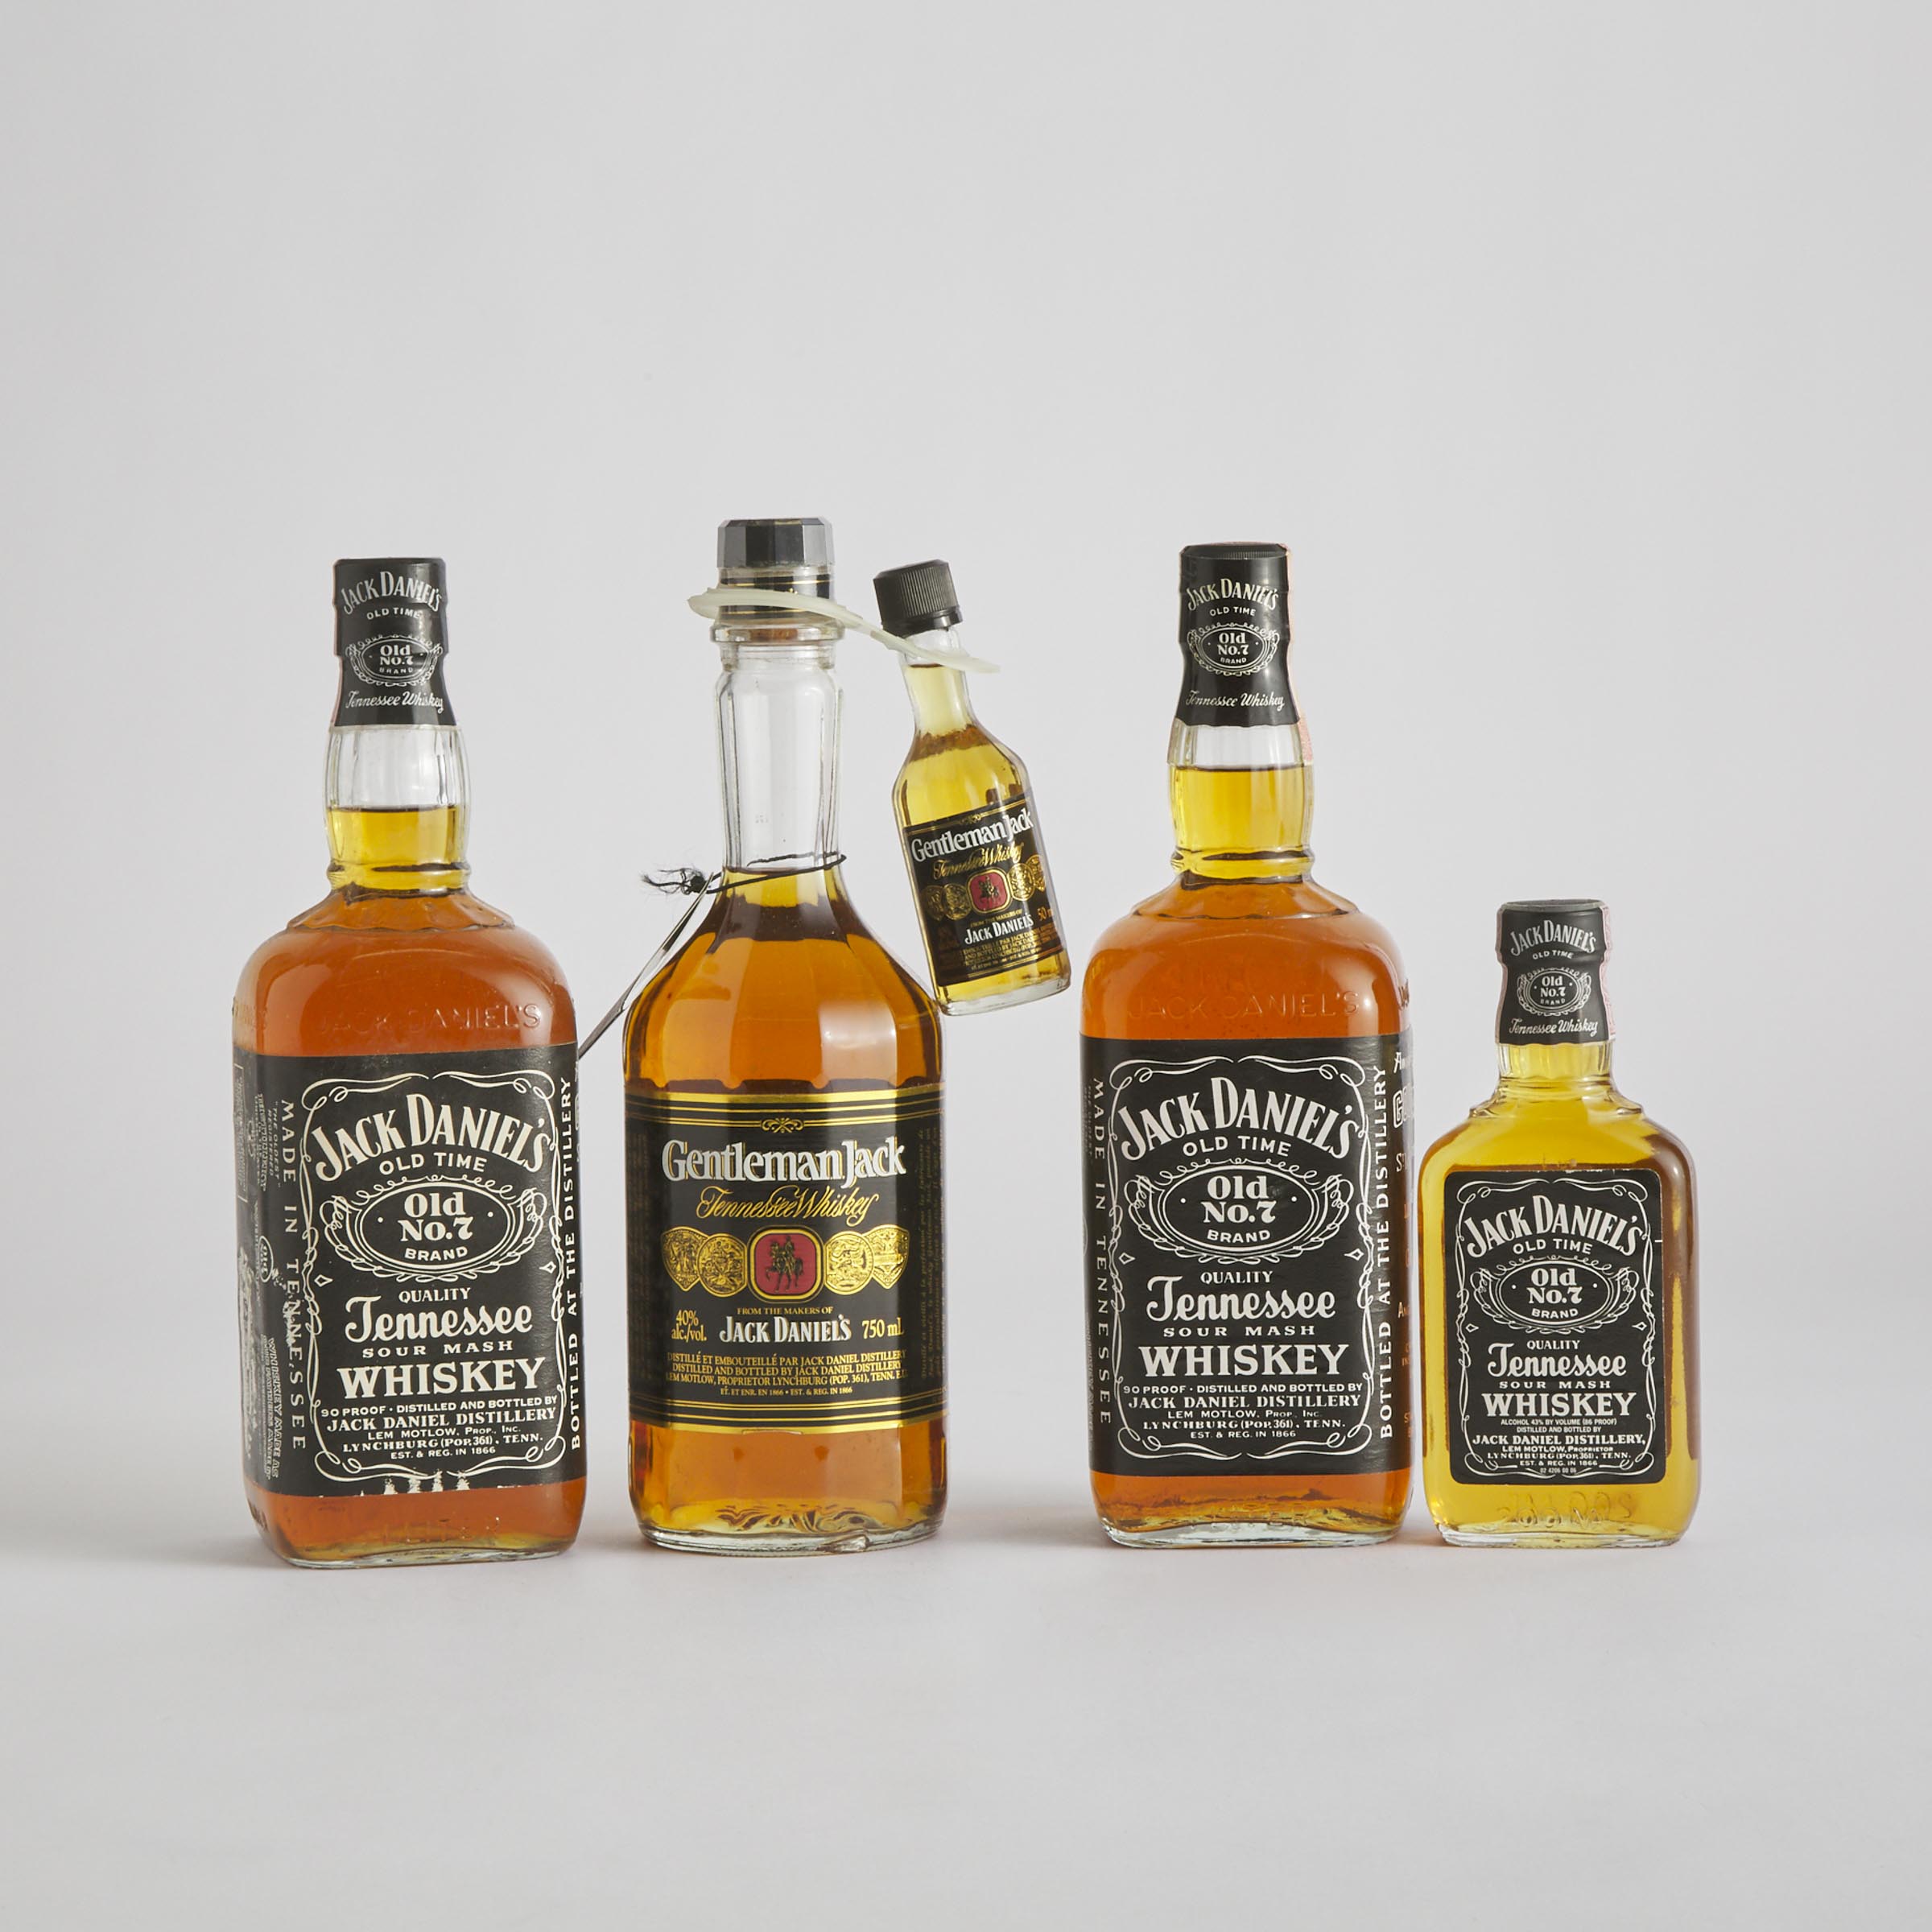 GENTLEMAN JACK TENNESSEE WHISKEY (ONE 750 ML)
JACK DANIELS TENNESSEE WHISKEY OLD NO. 7 BRAND (TWO 1 LITRE)
JACK DANIELS TENNESSEE WHISKEY OLD NO. 7 BRAND (ONE 200 ML)